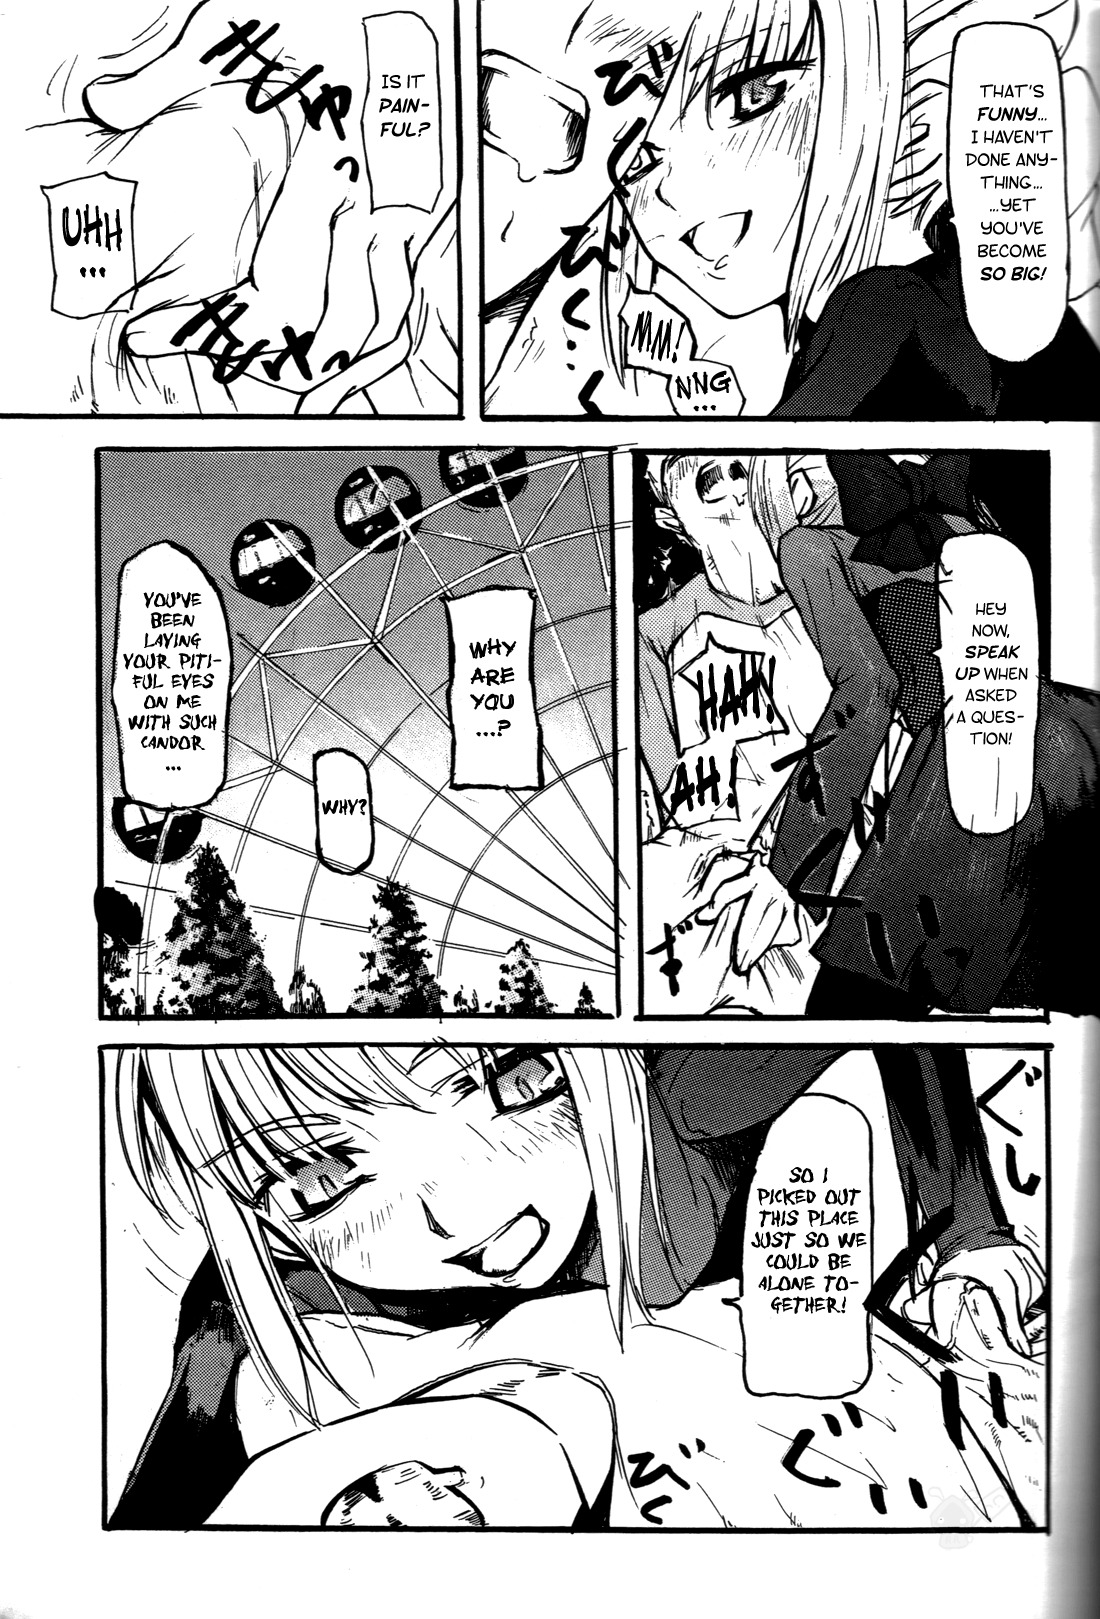 (C71) [DDT (Itachi)] OUVERTURE (Fate/hollow ataraxia) [English] page 6 full